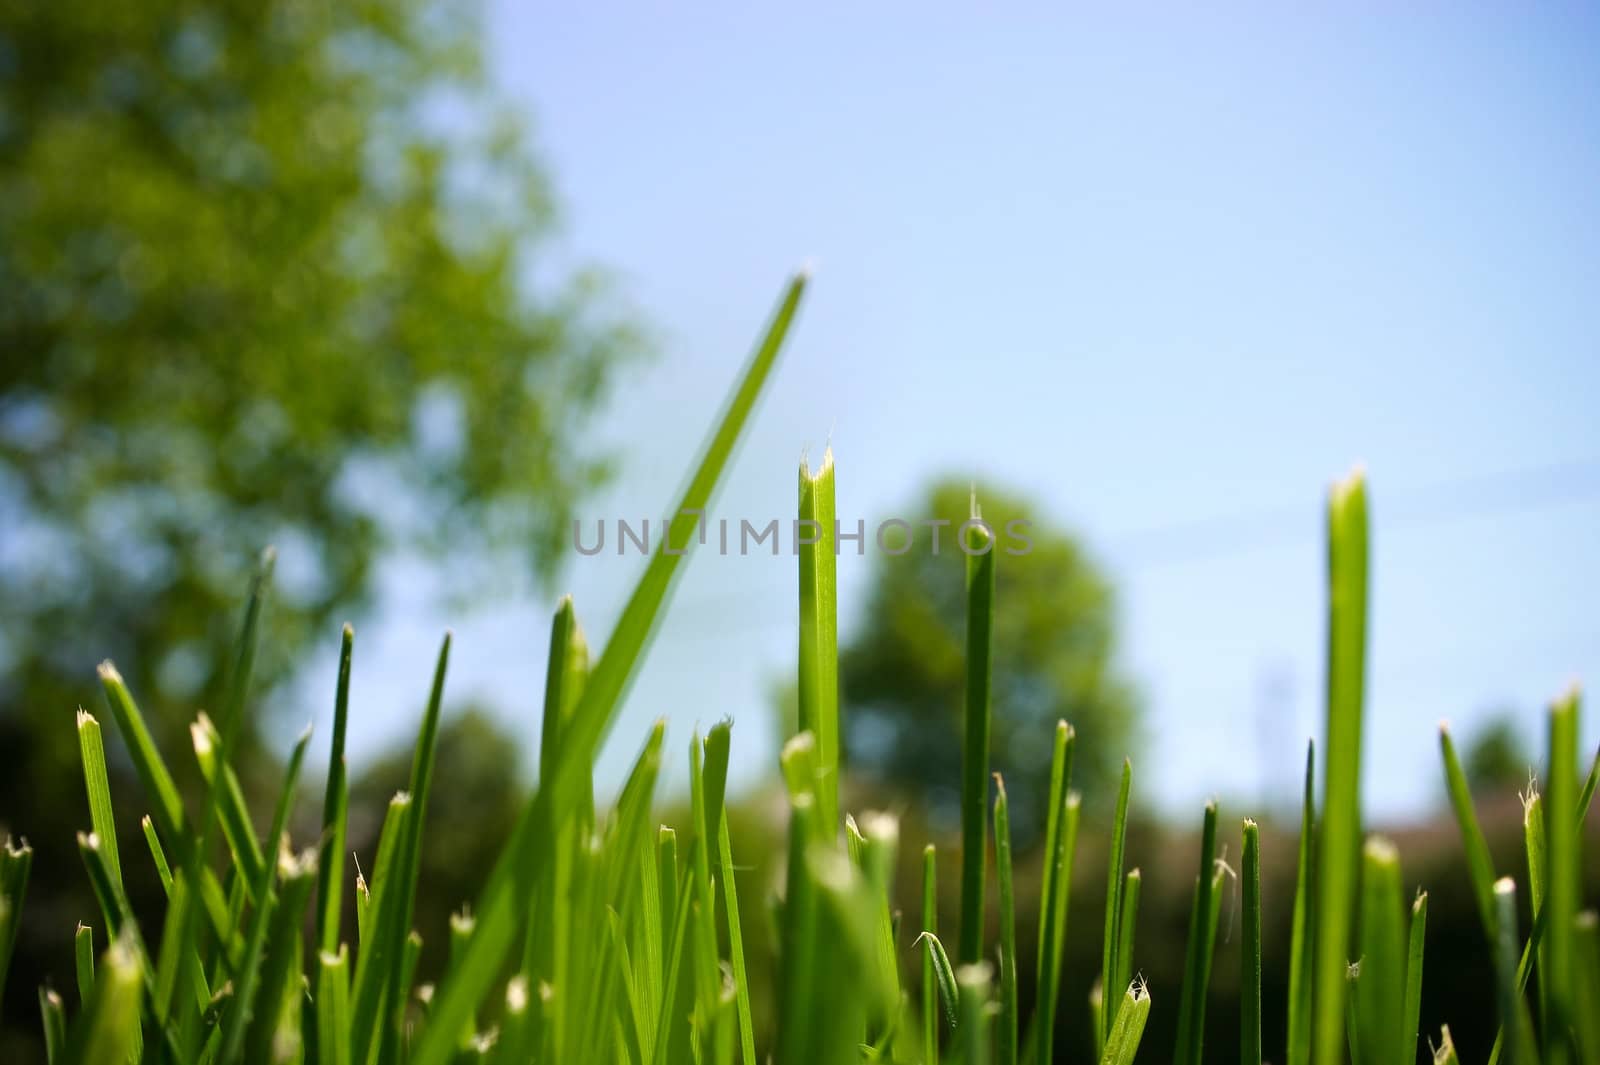 Close-up Grass by micahbowerbank